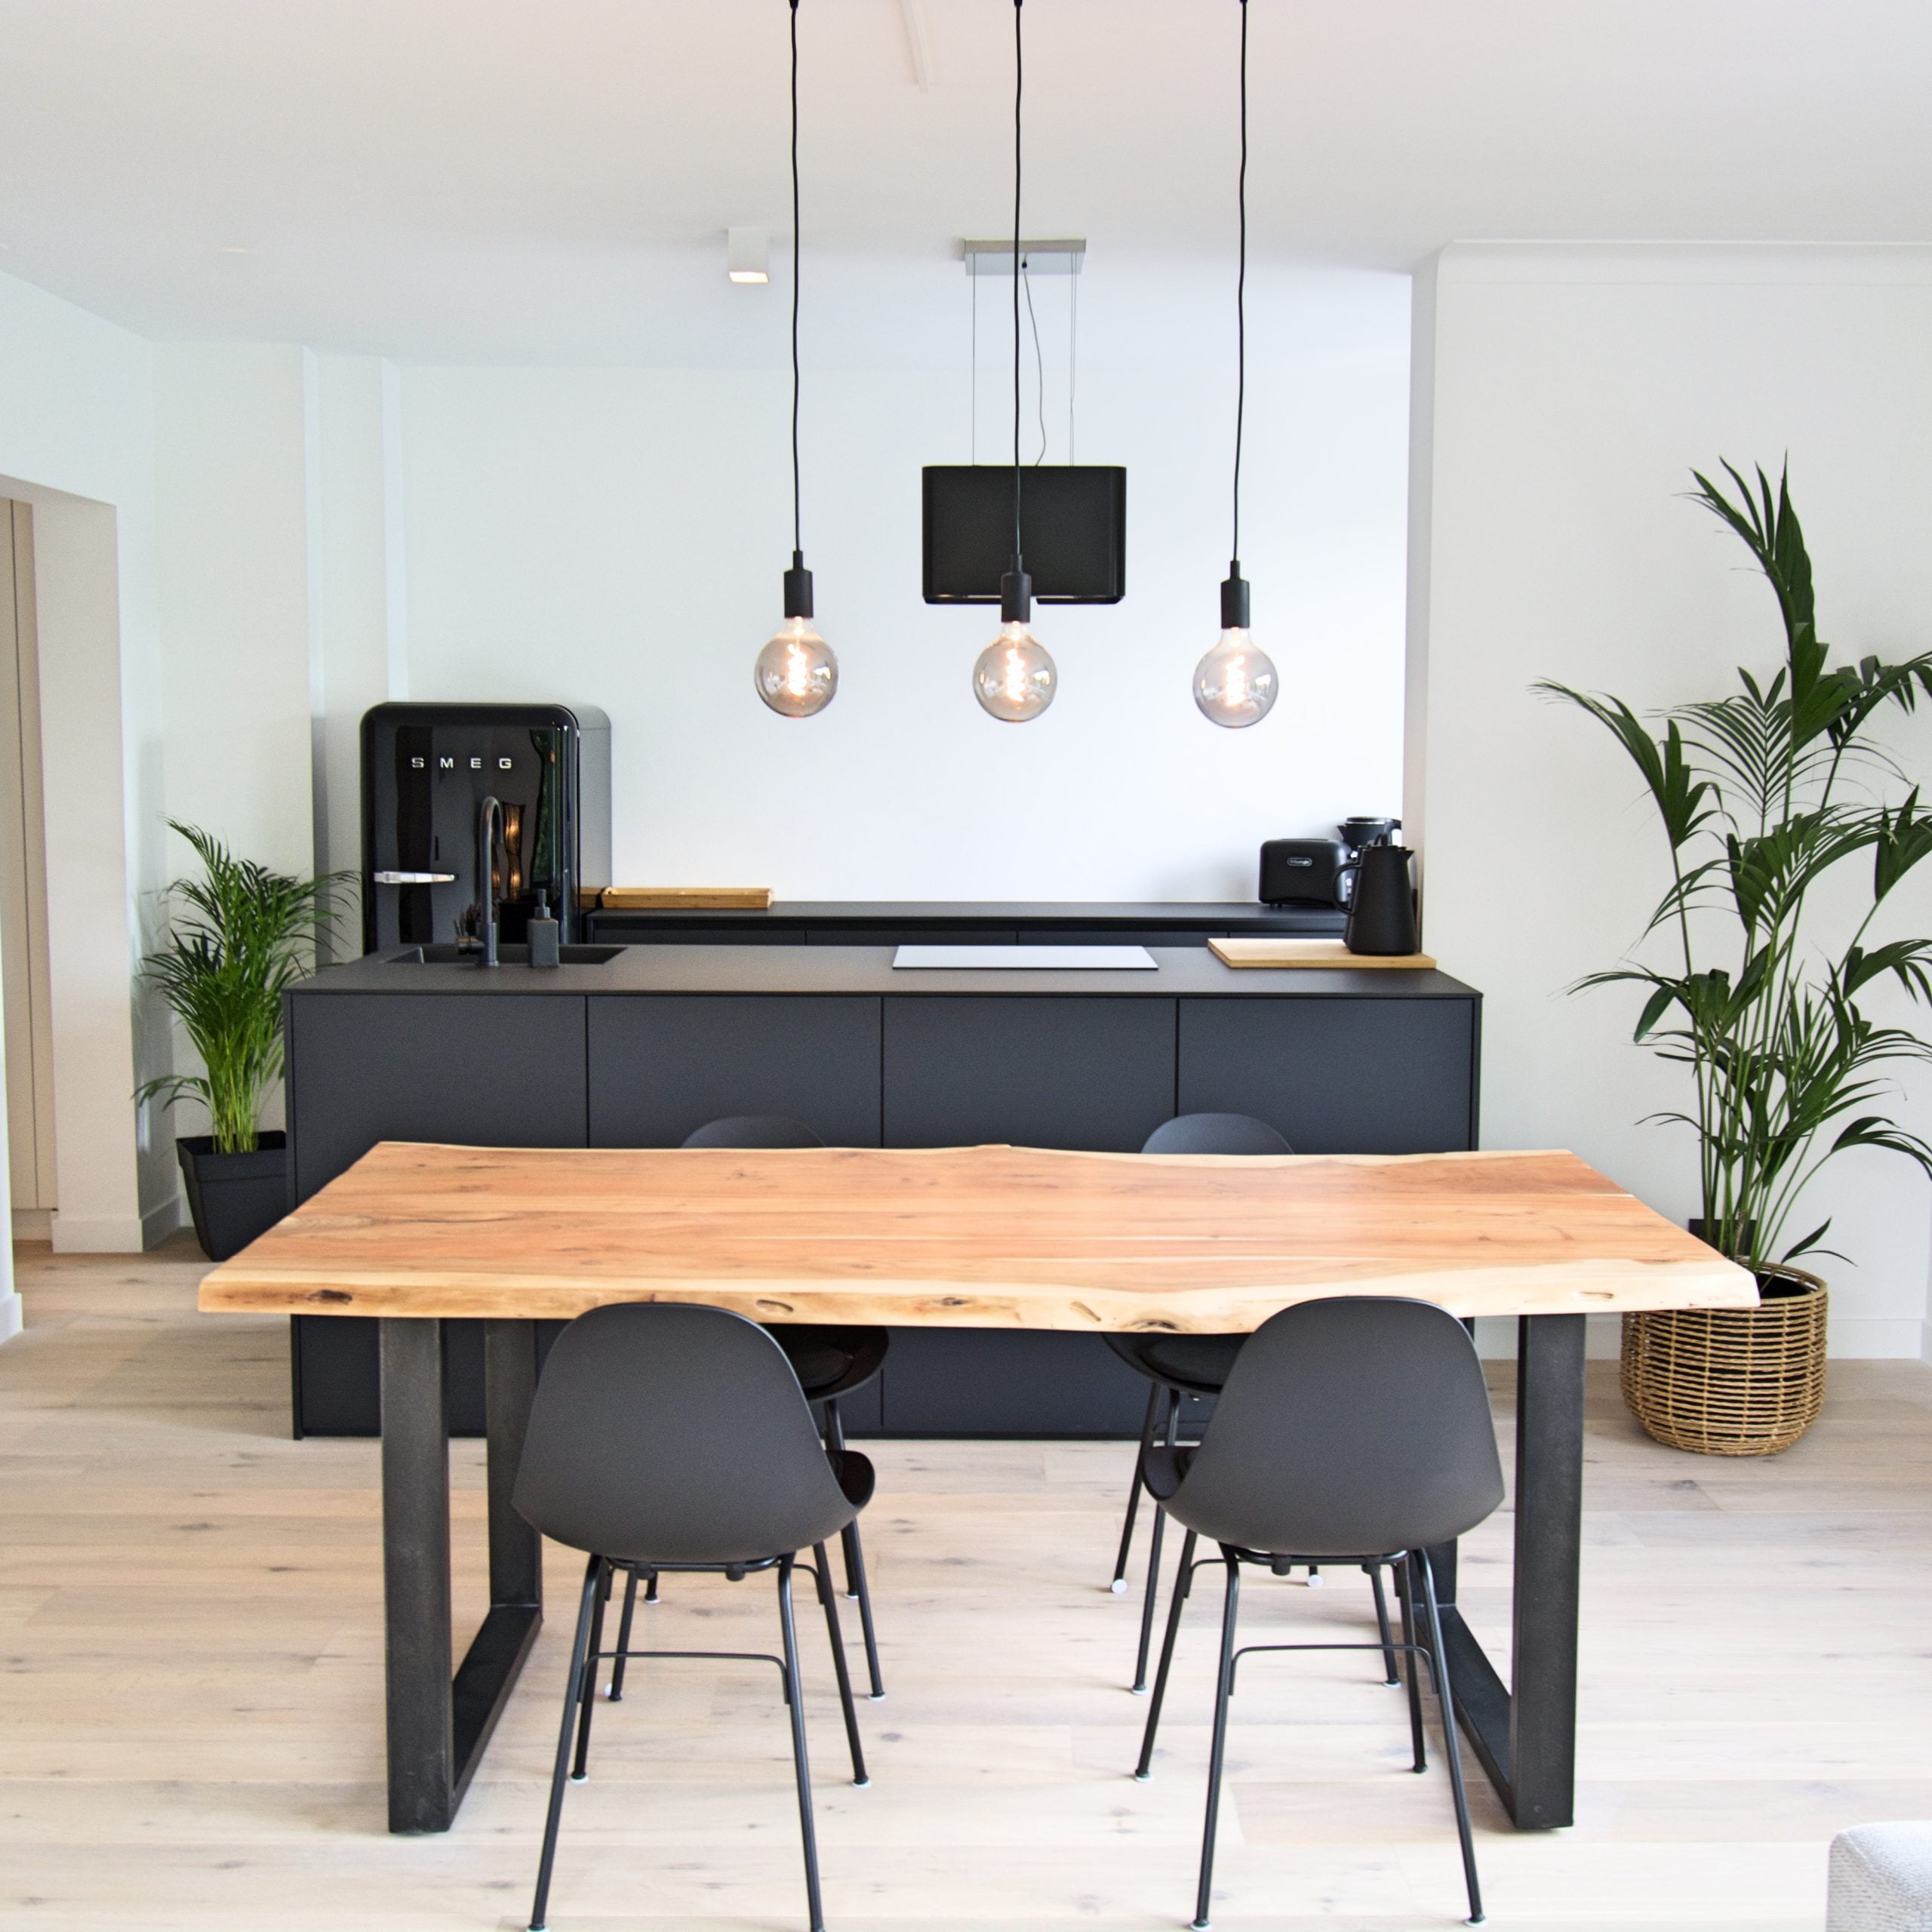 Modern home in Antwerp for expats